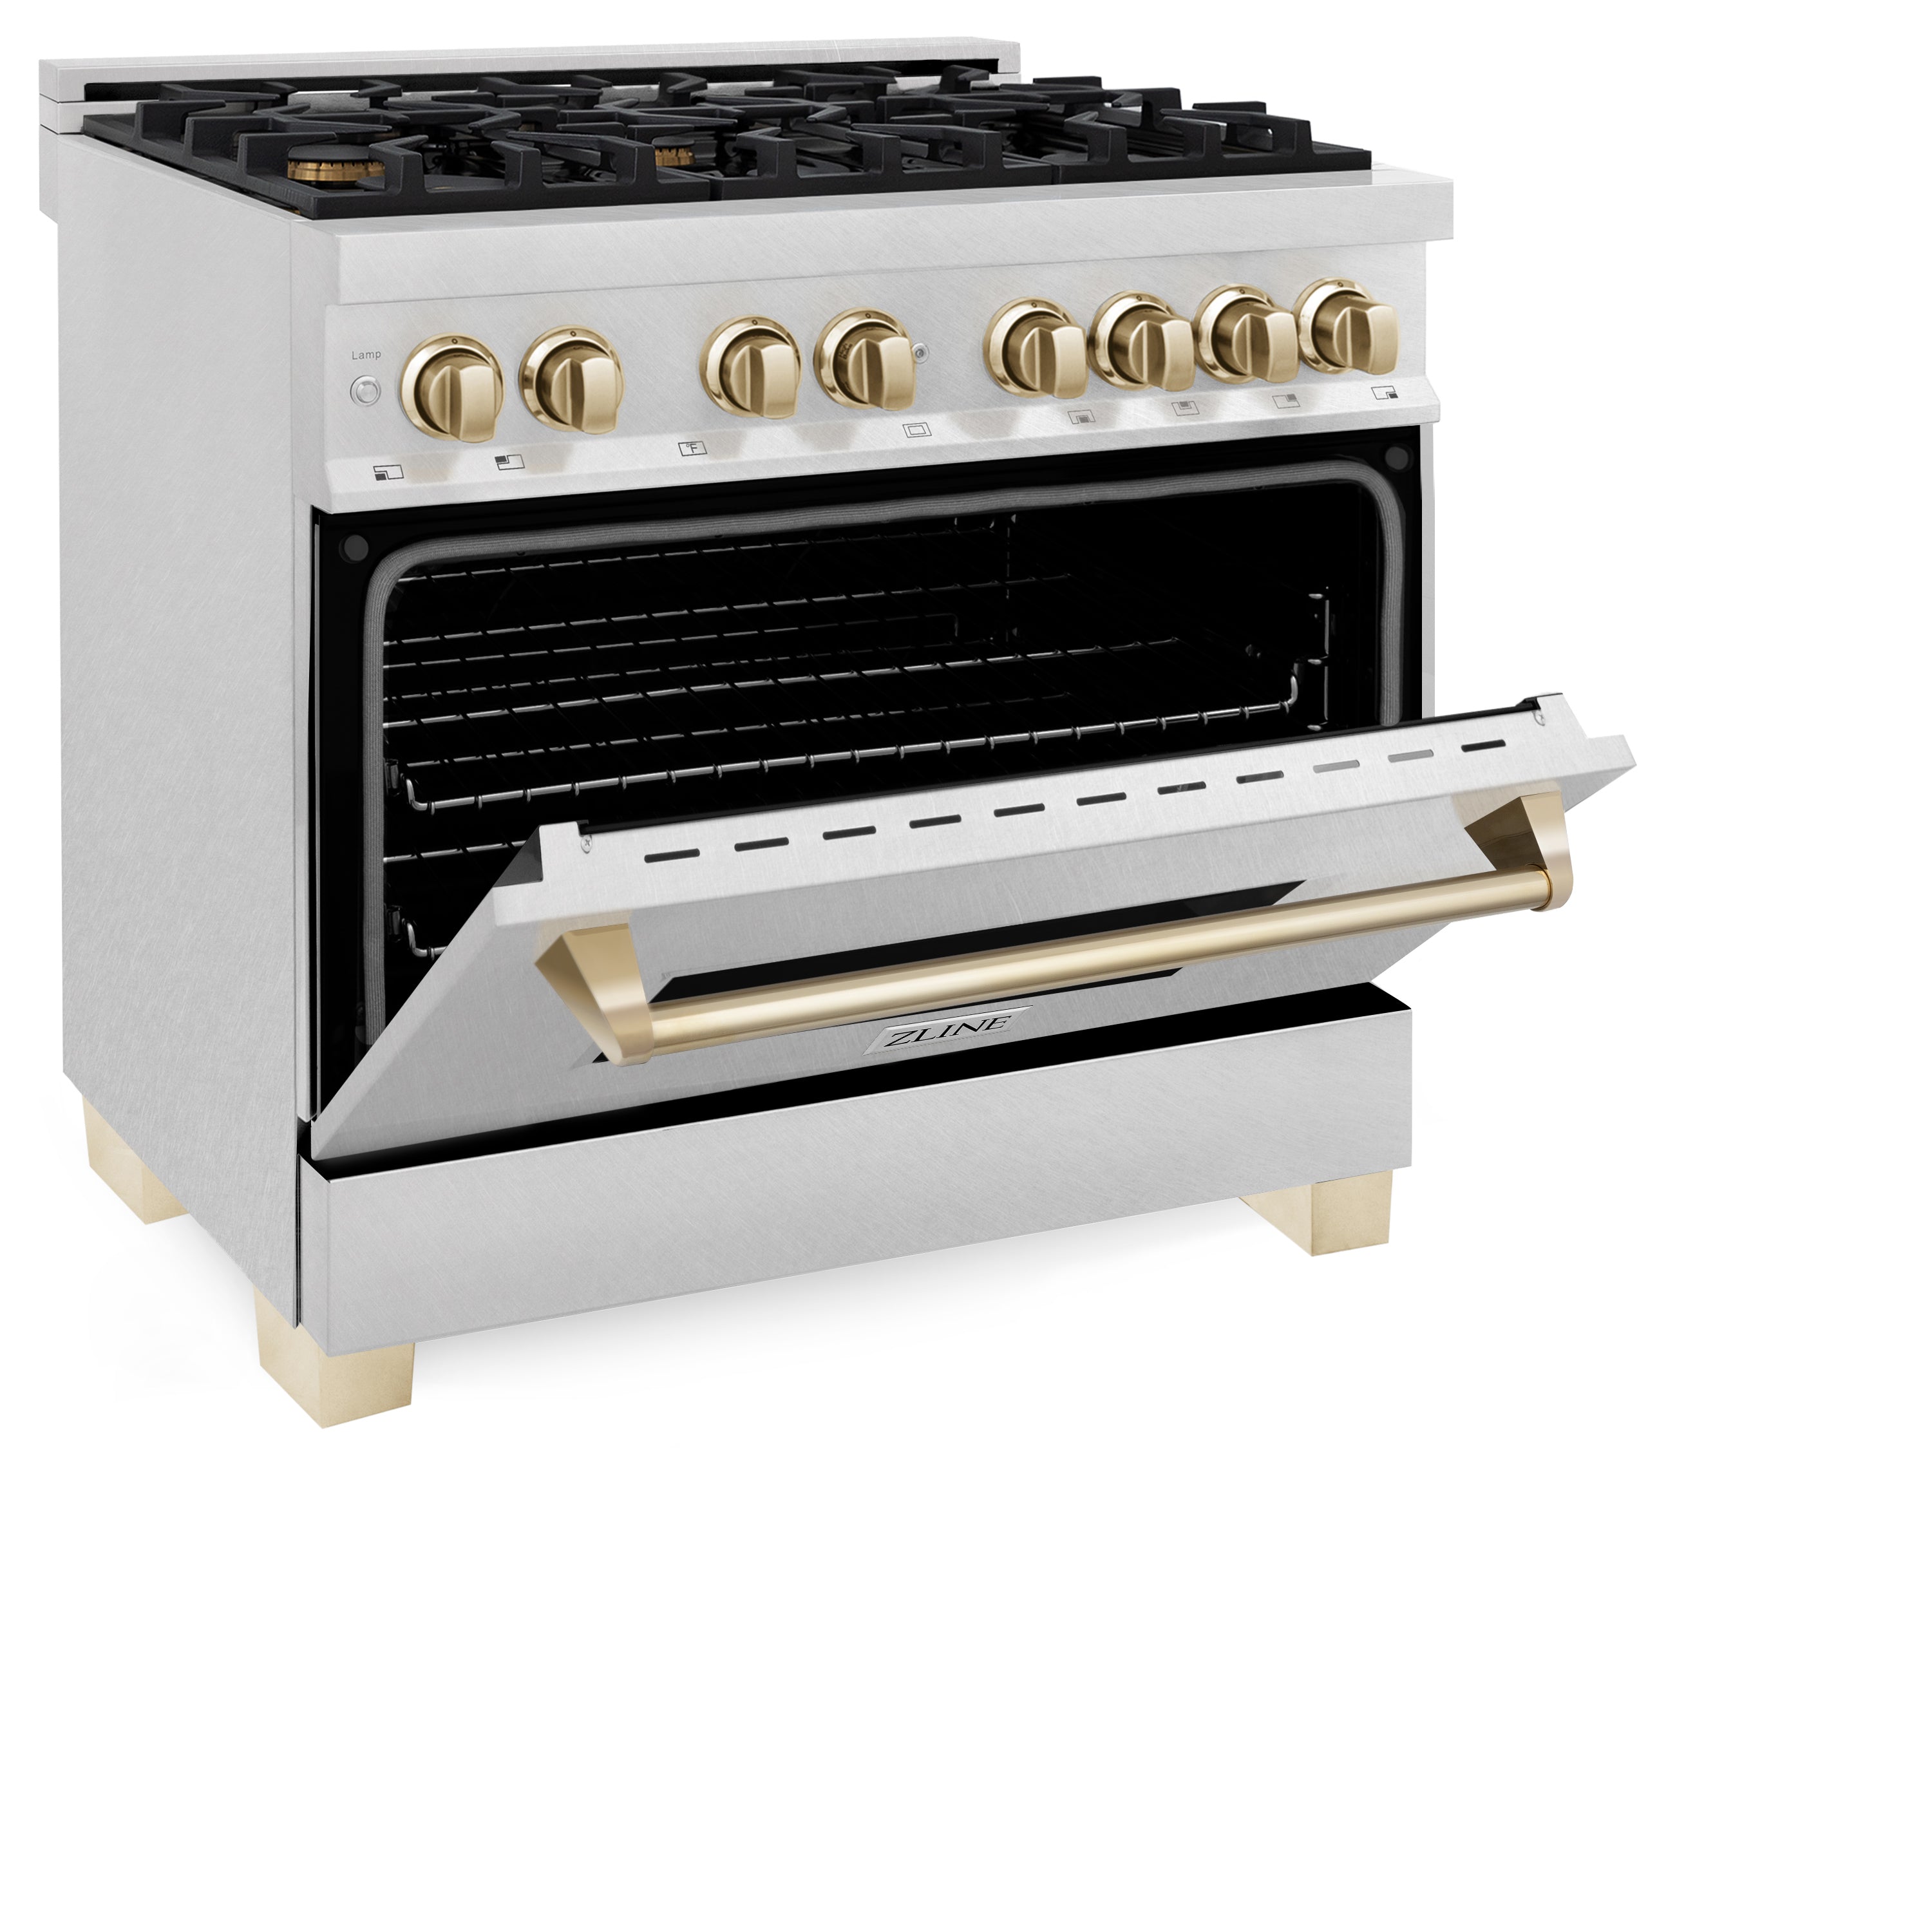 ZLINE Autograph Edition 36" 4.6 cu. ft. Dual Fuel Range with Gas Stove and Electric Oven in Fingerprint Resistant Stainless Steel with Polished Gold Accents (RASZ-SN-36-G)